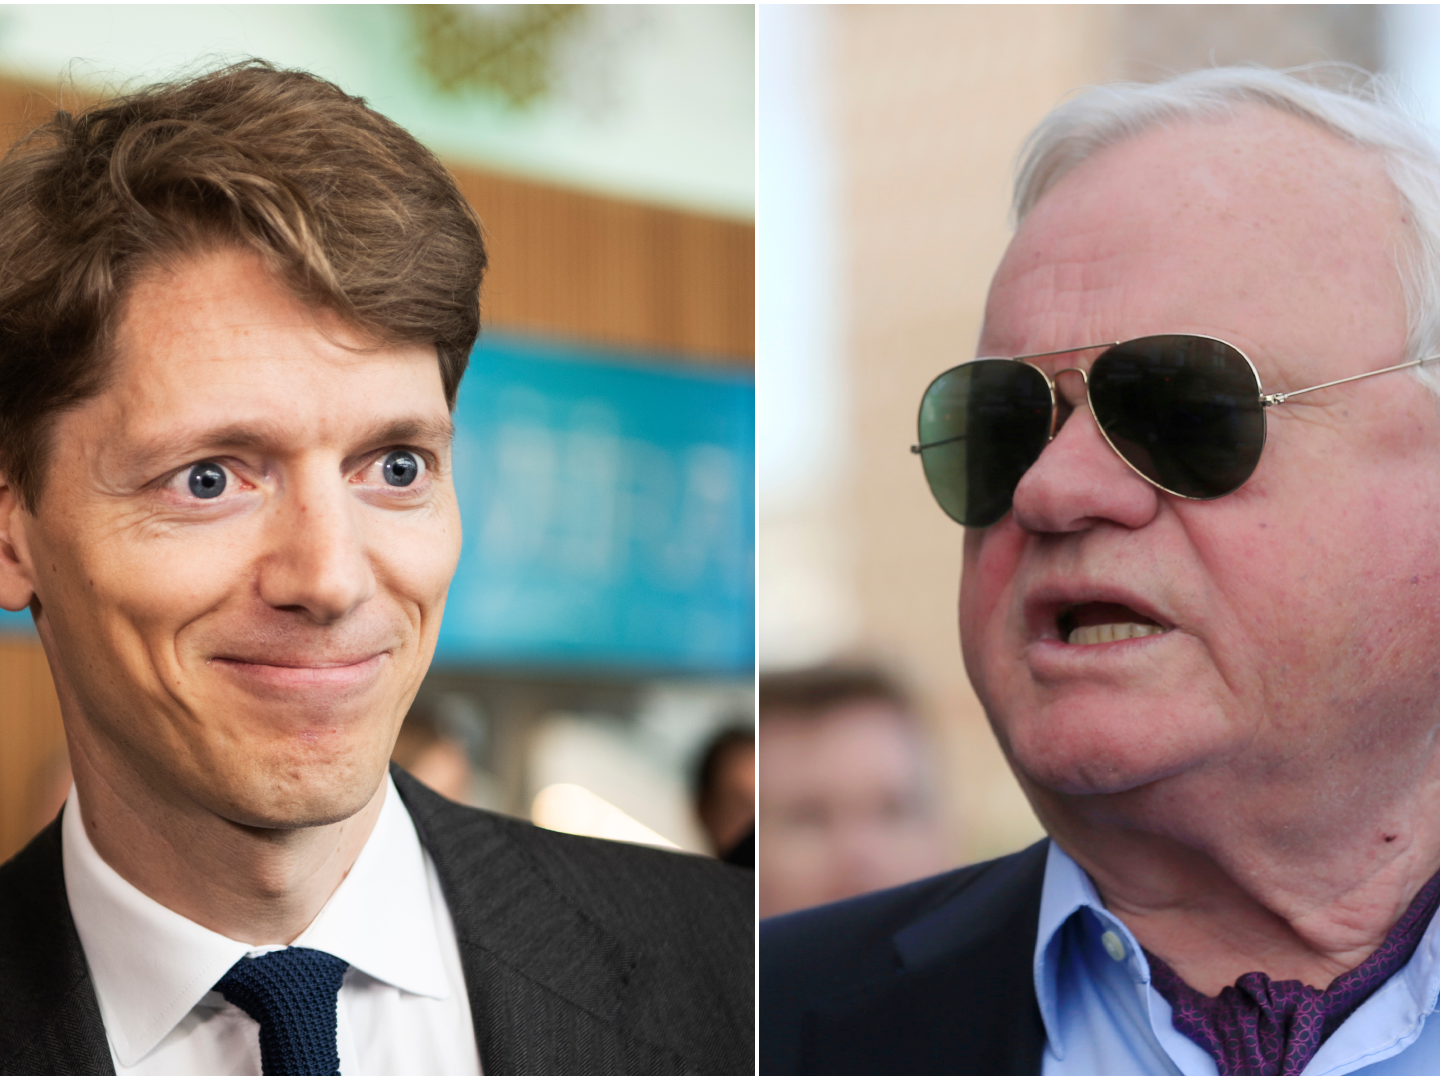 A.P. Møller Holding, which has Robert Maersk Uggla (left) as CEO, will become the main shareholder in Dof Group after the deal. Other investors include John Fredriksen, the richest man in Norway. | Photo: Tycho Gregers/Ritzau/Ritzau Scanpix and Ints Kalnins/Reuters/Ritzau Scanpix